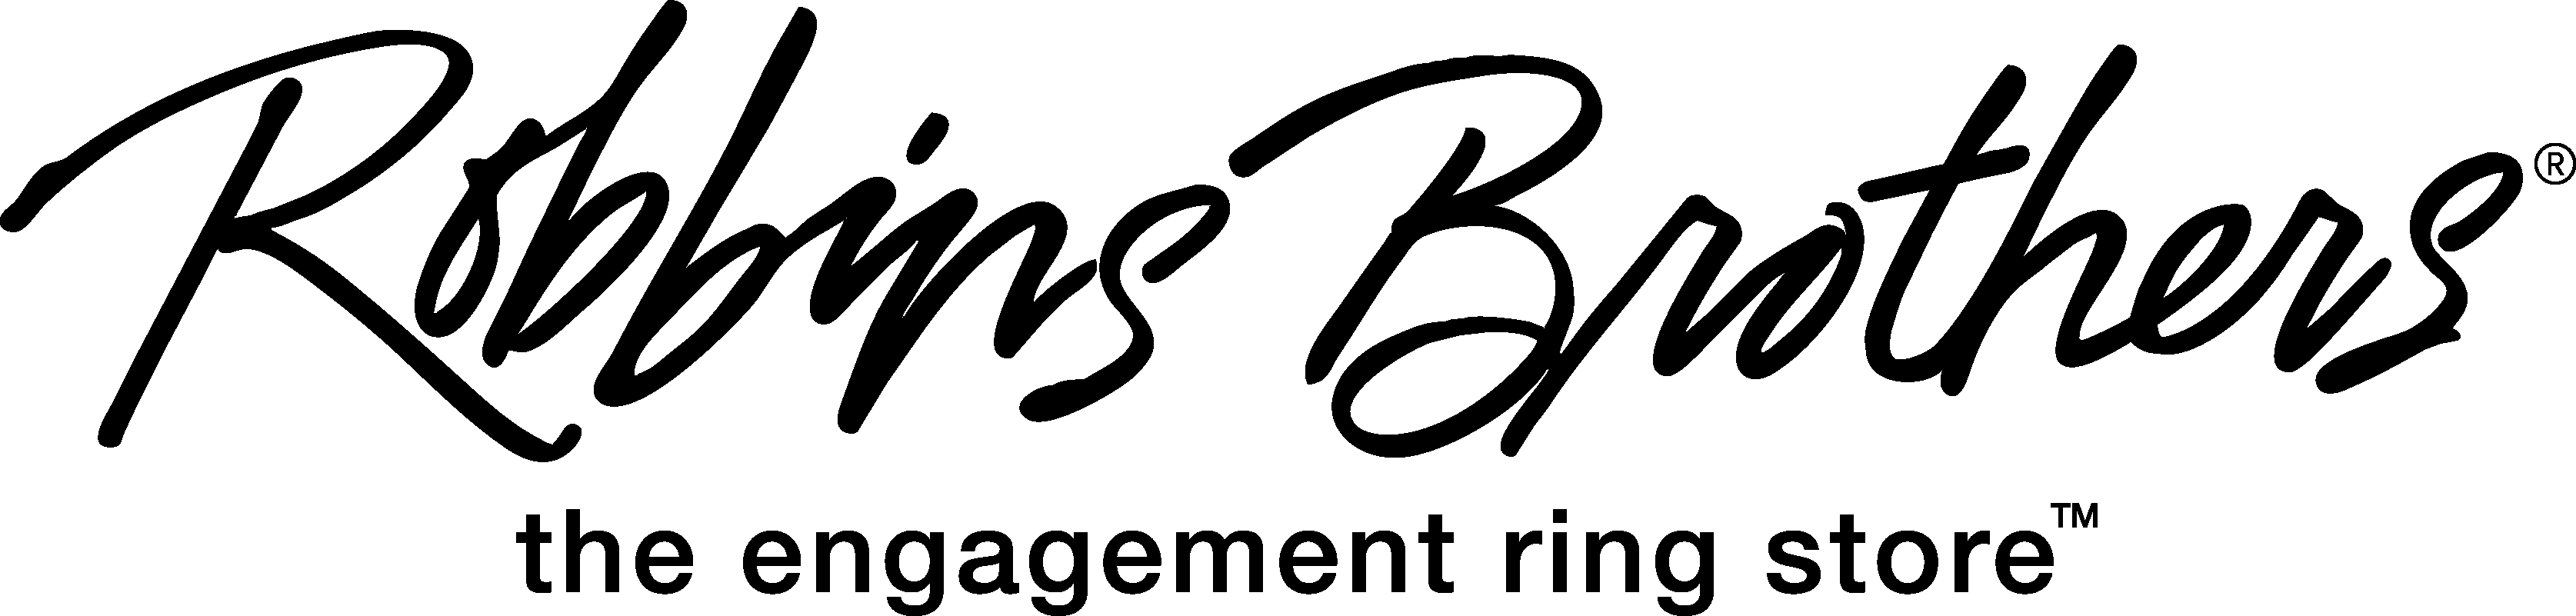 Robbins Brothers, The Engagement Ring Store logo